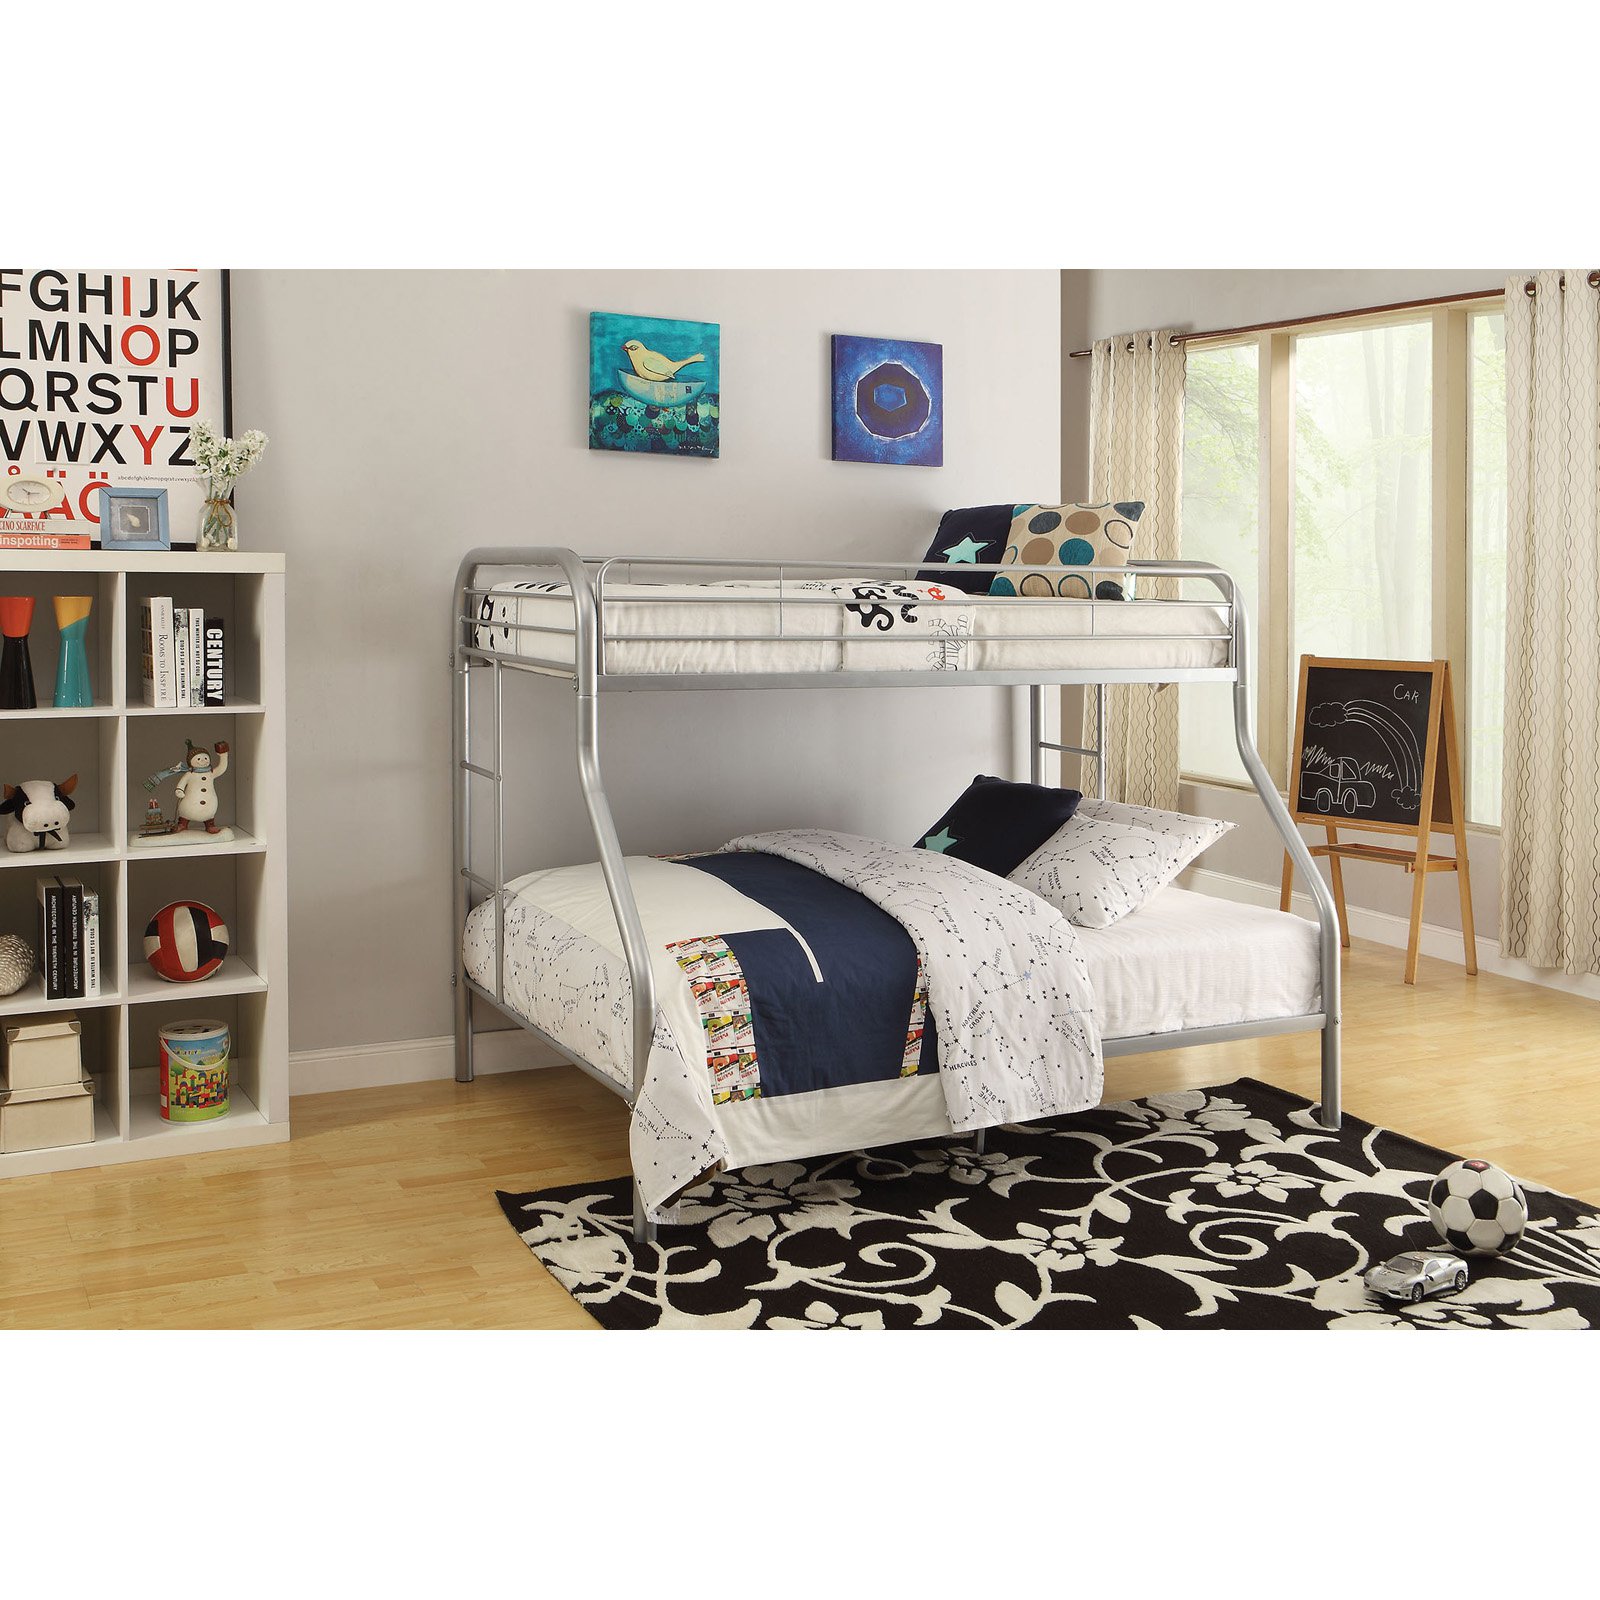 ACME Furniture Tritan Twin XL over Queen Bunk Bed in Silver - image 1 of 2